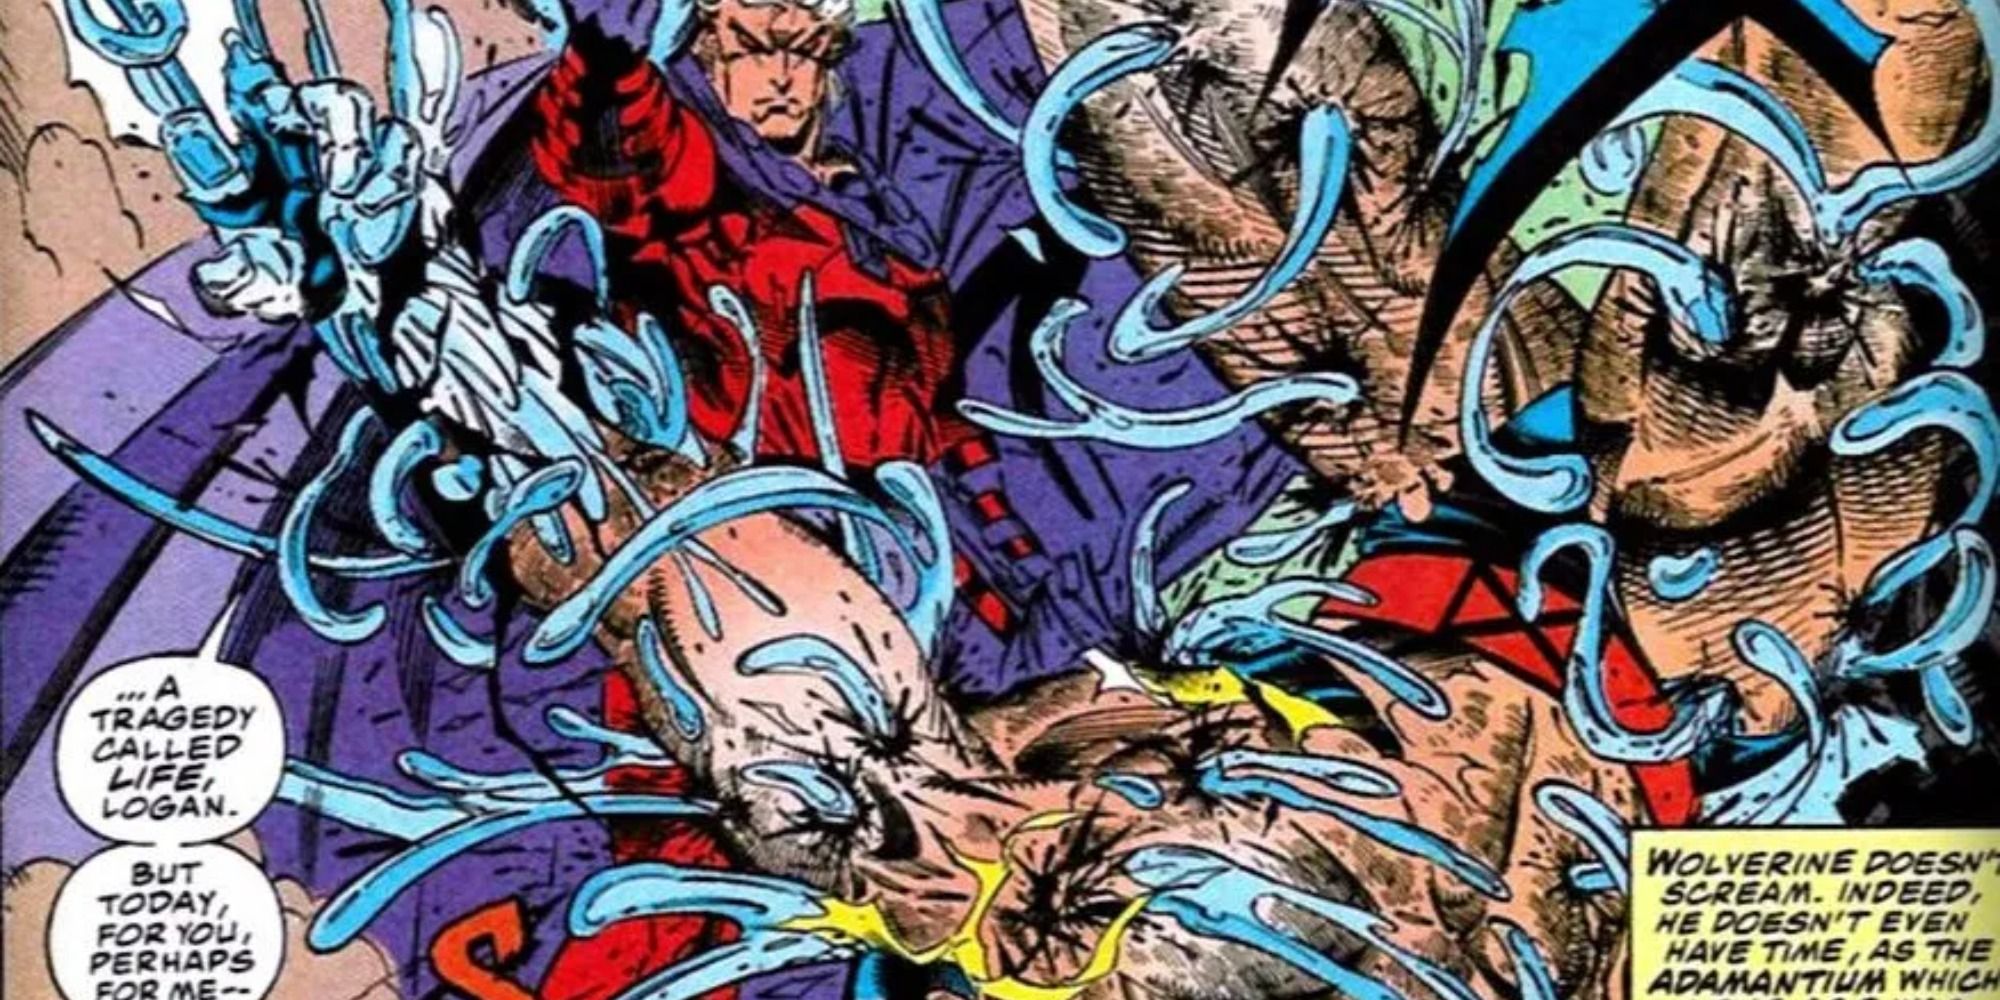 Magneto rips the adamantium out of Wolverines body in Marvel Comics.